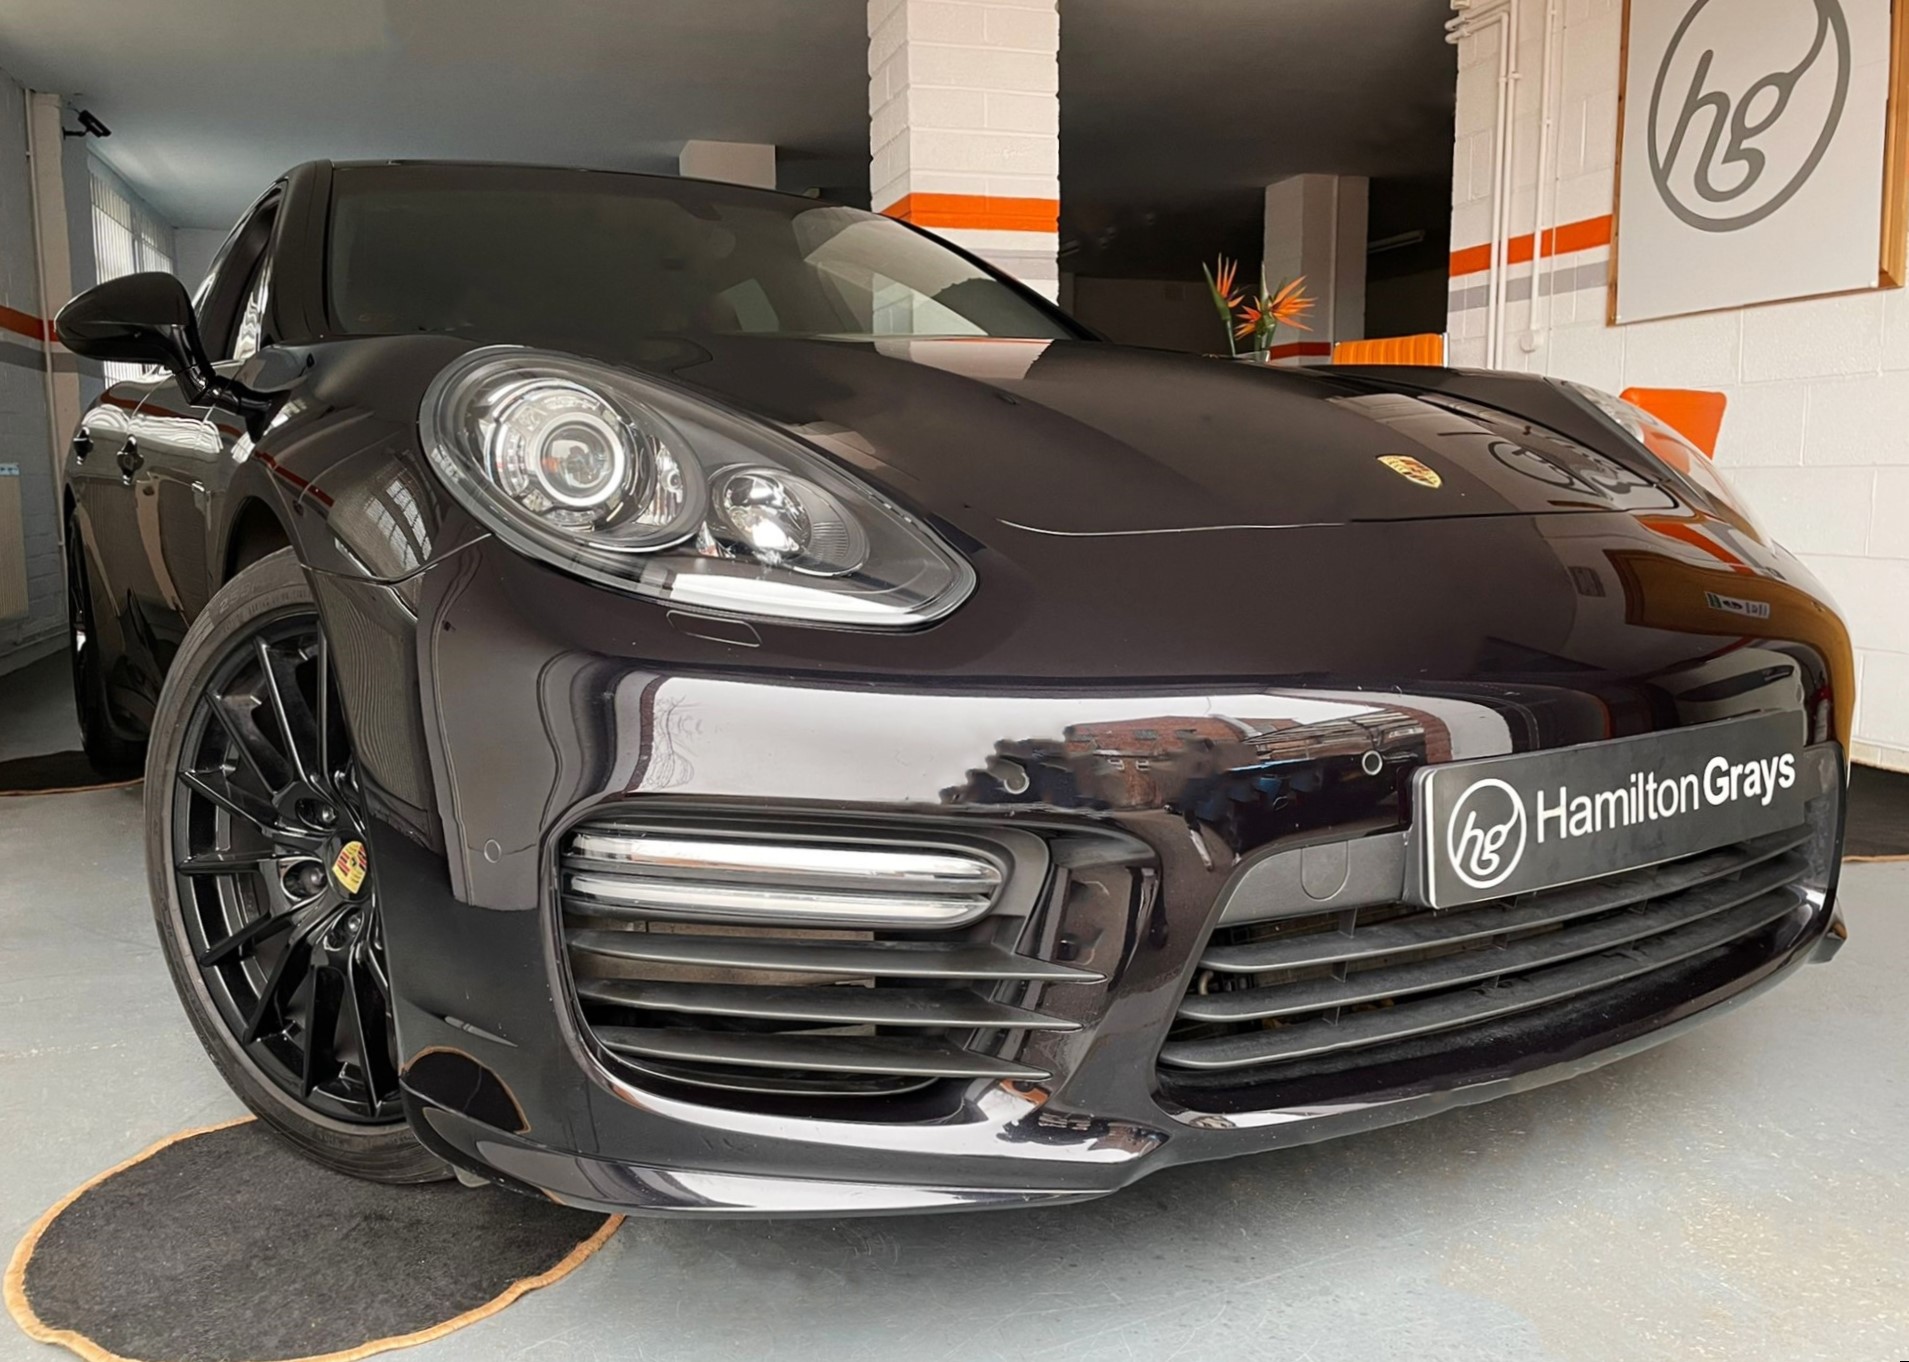 2016 (16) Porsche Panamera 4.8 V8 GTS PDK AWD. In Classic Jet Black with GTS Leather and Alcantara Black Interior. Just 18k.. FSH. Extensive Specification..  £49,950